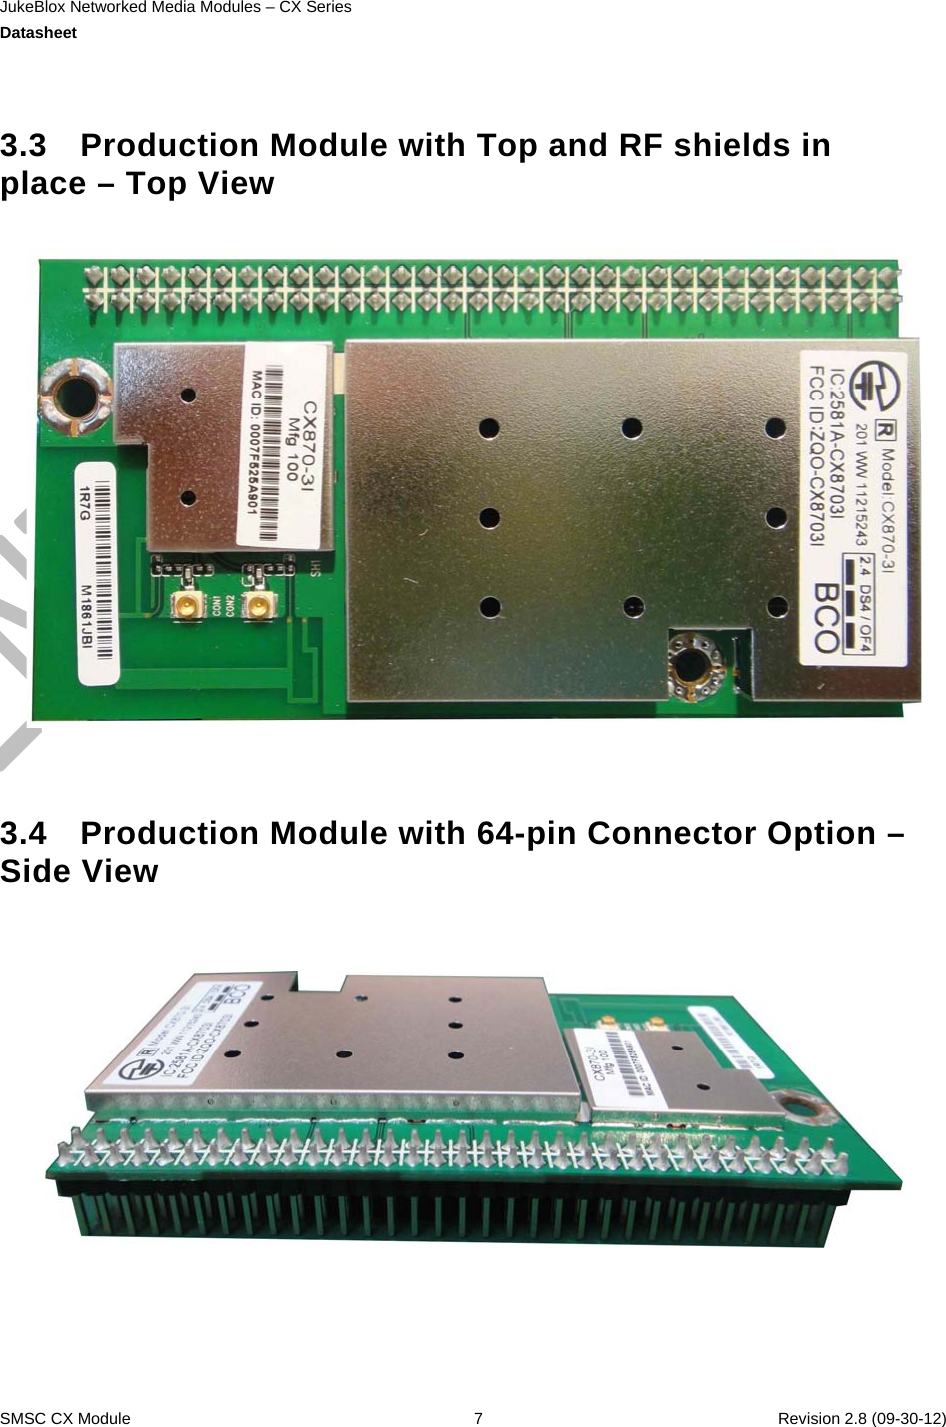 JukeBlox Networked Media Modules – CX Series  Datasheet    SMSC CX Module  7    Revision 2.8 (09-30-12)   3.3  Production Module with Top and RF shields in place – Top View     3.4  Production Module with 64-pin Connector Option – Side View   